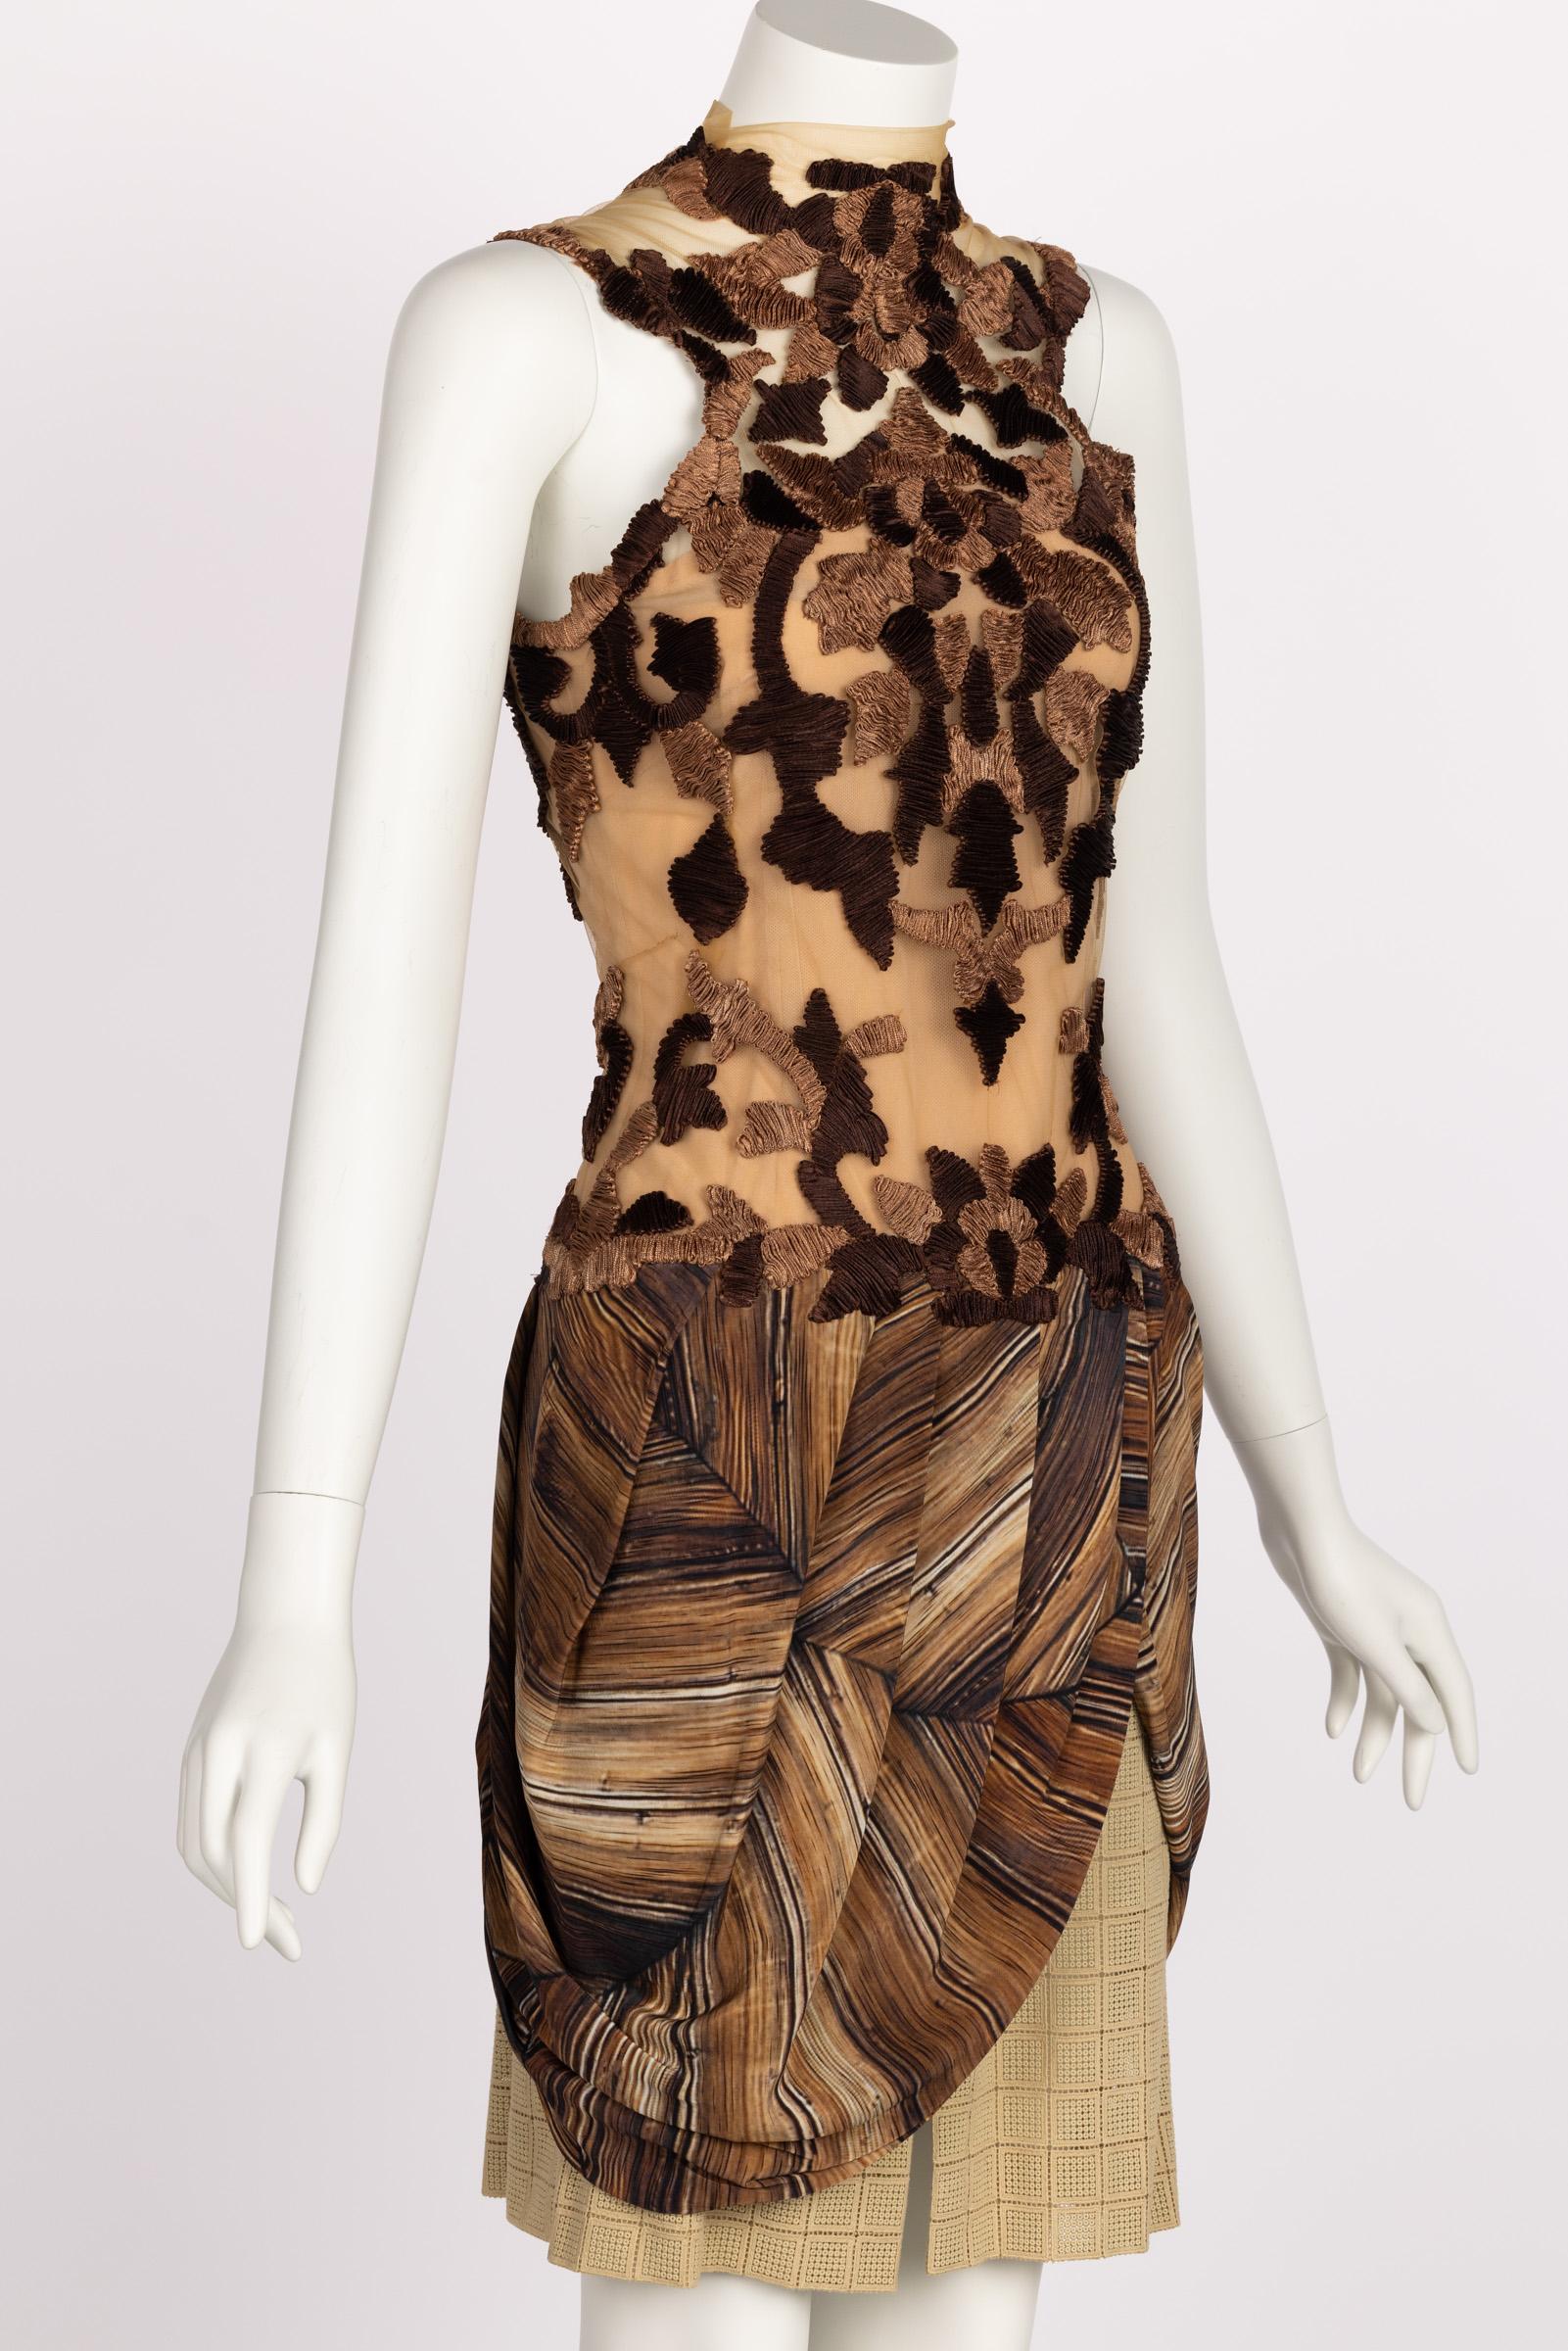 Rodarte 2011 Runway Embroidered Tulle Wood Dress  In Excellent Condition For Sale In Boca Raton, FL